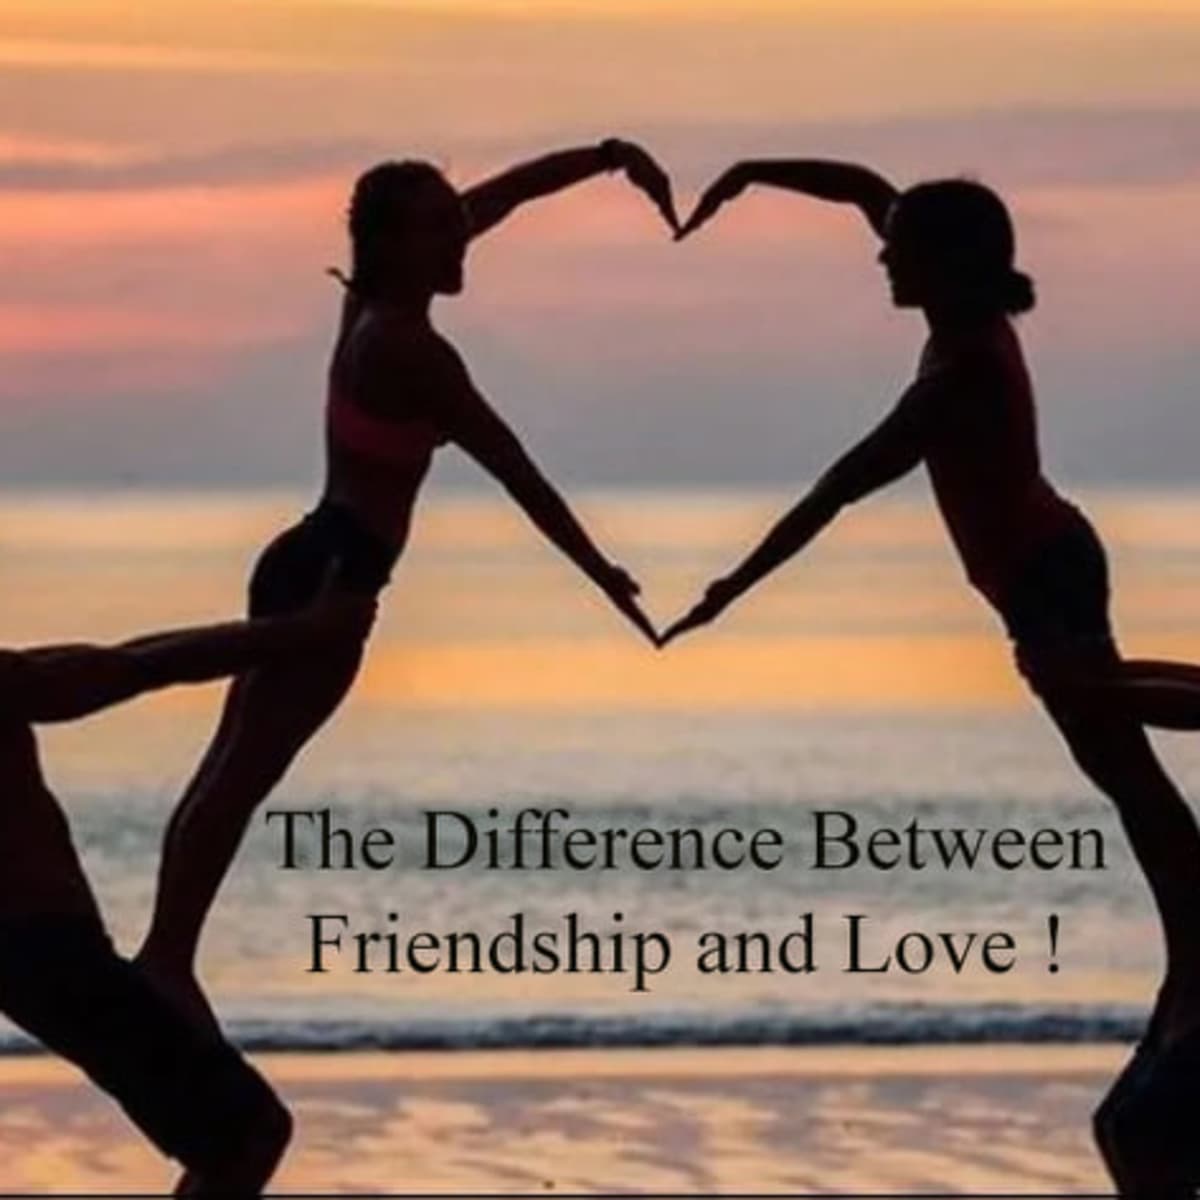 The Difference Between Friendship and Love! - HubPages